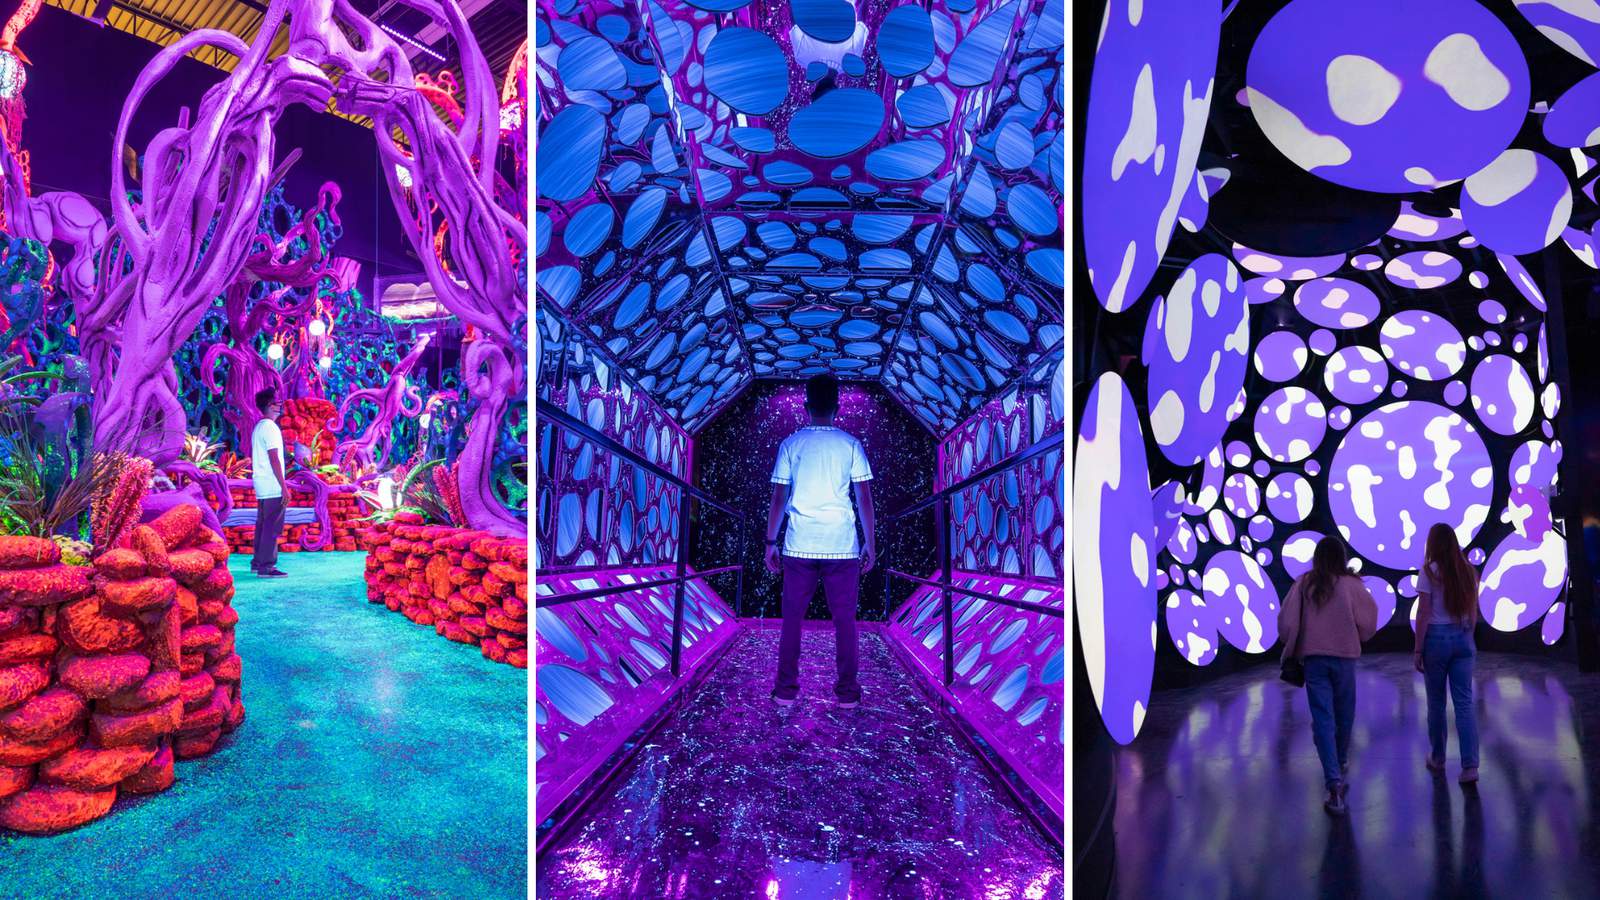 Out-of-this-world, interactive art museum touching down in Space City next week